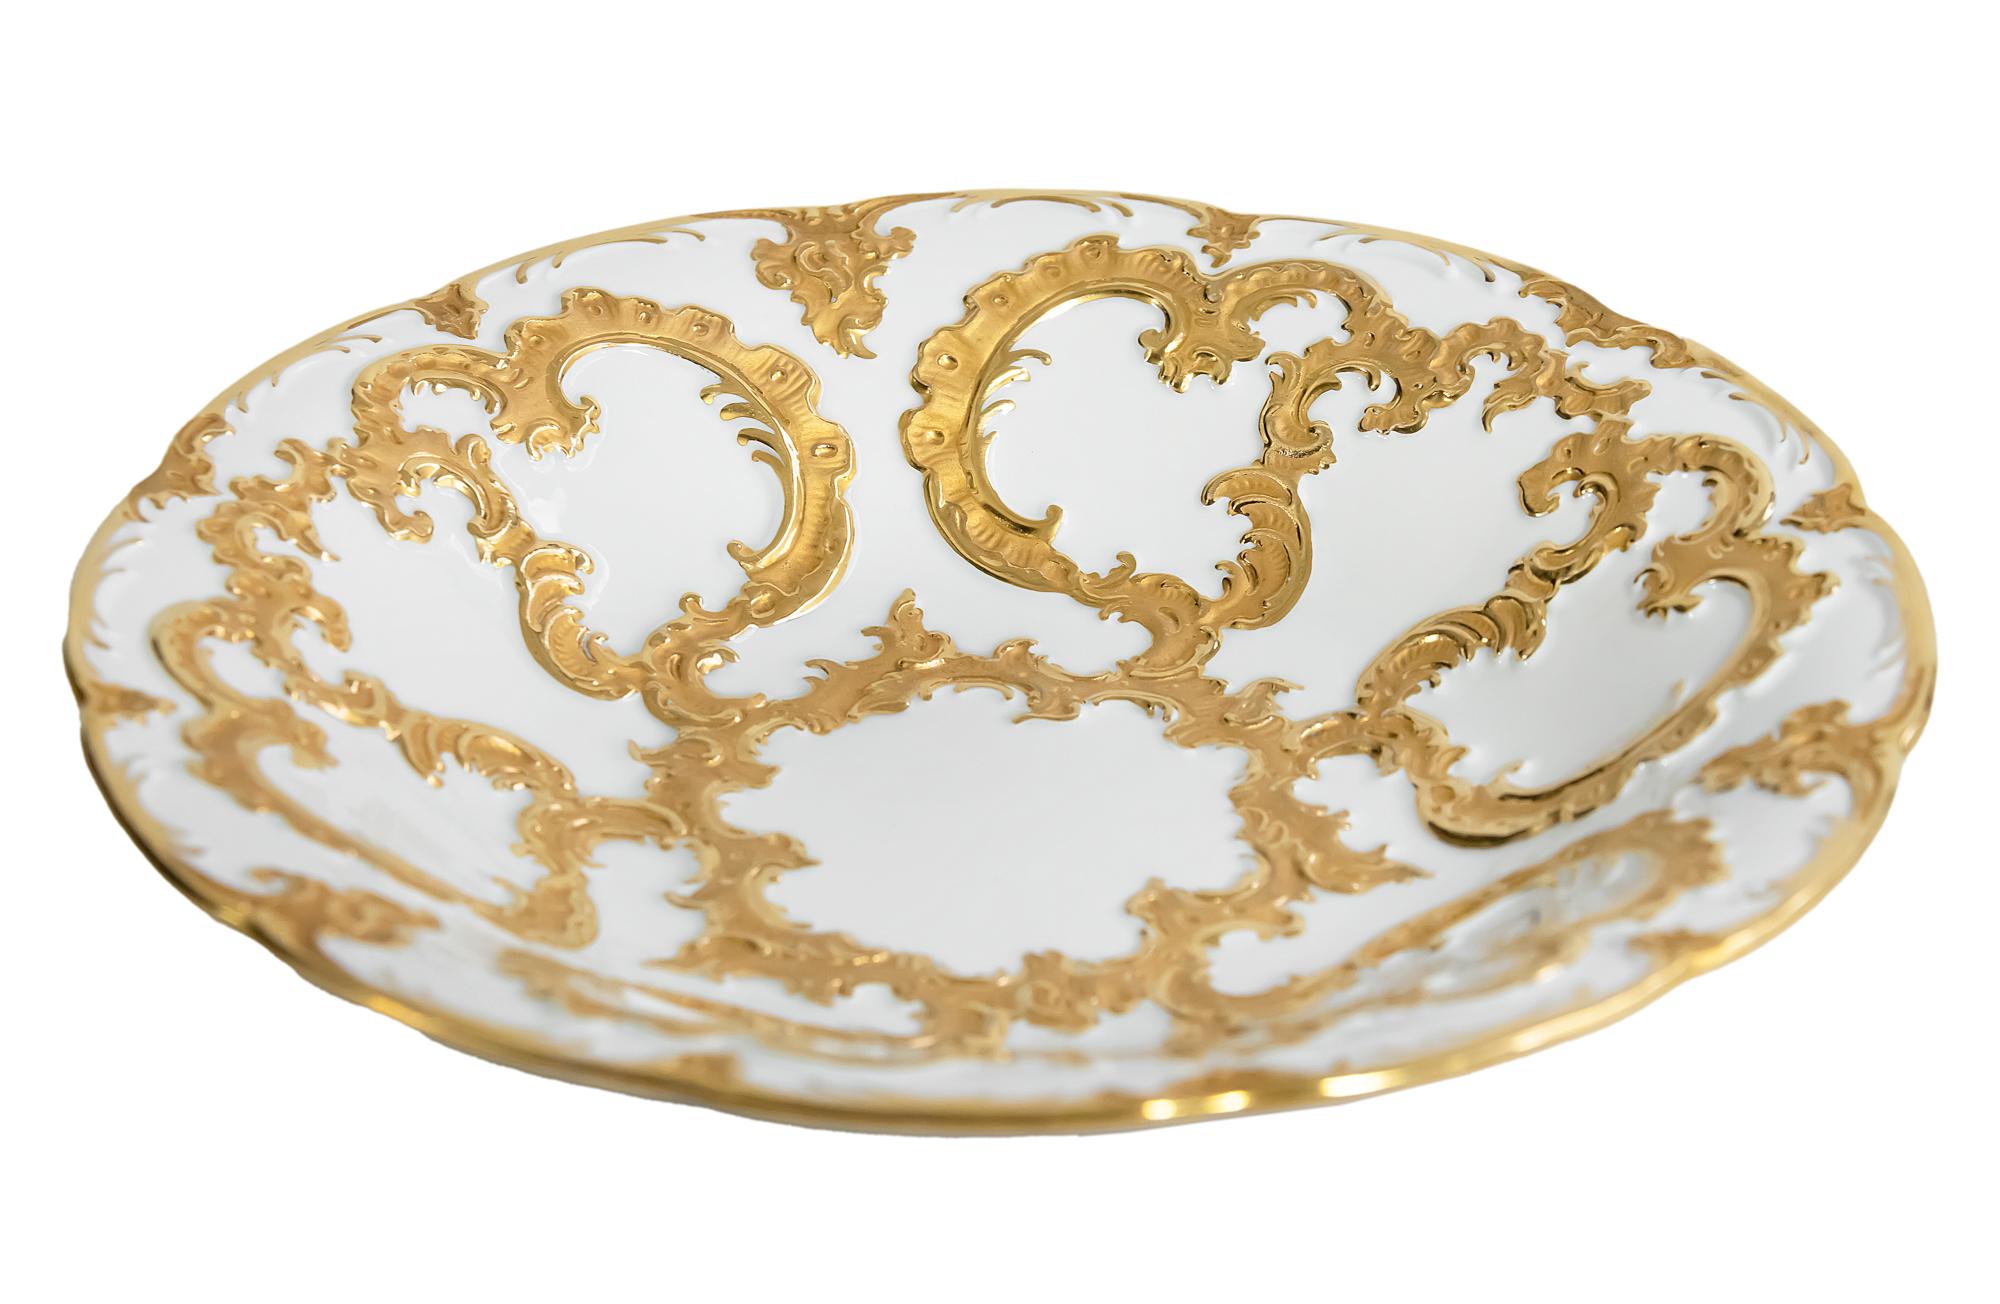 Meissen porcelain plate richly decorated with gold decor.